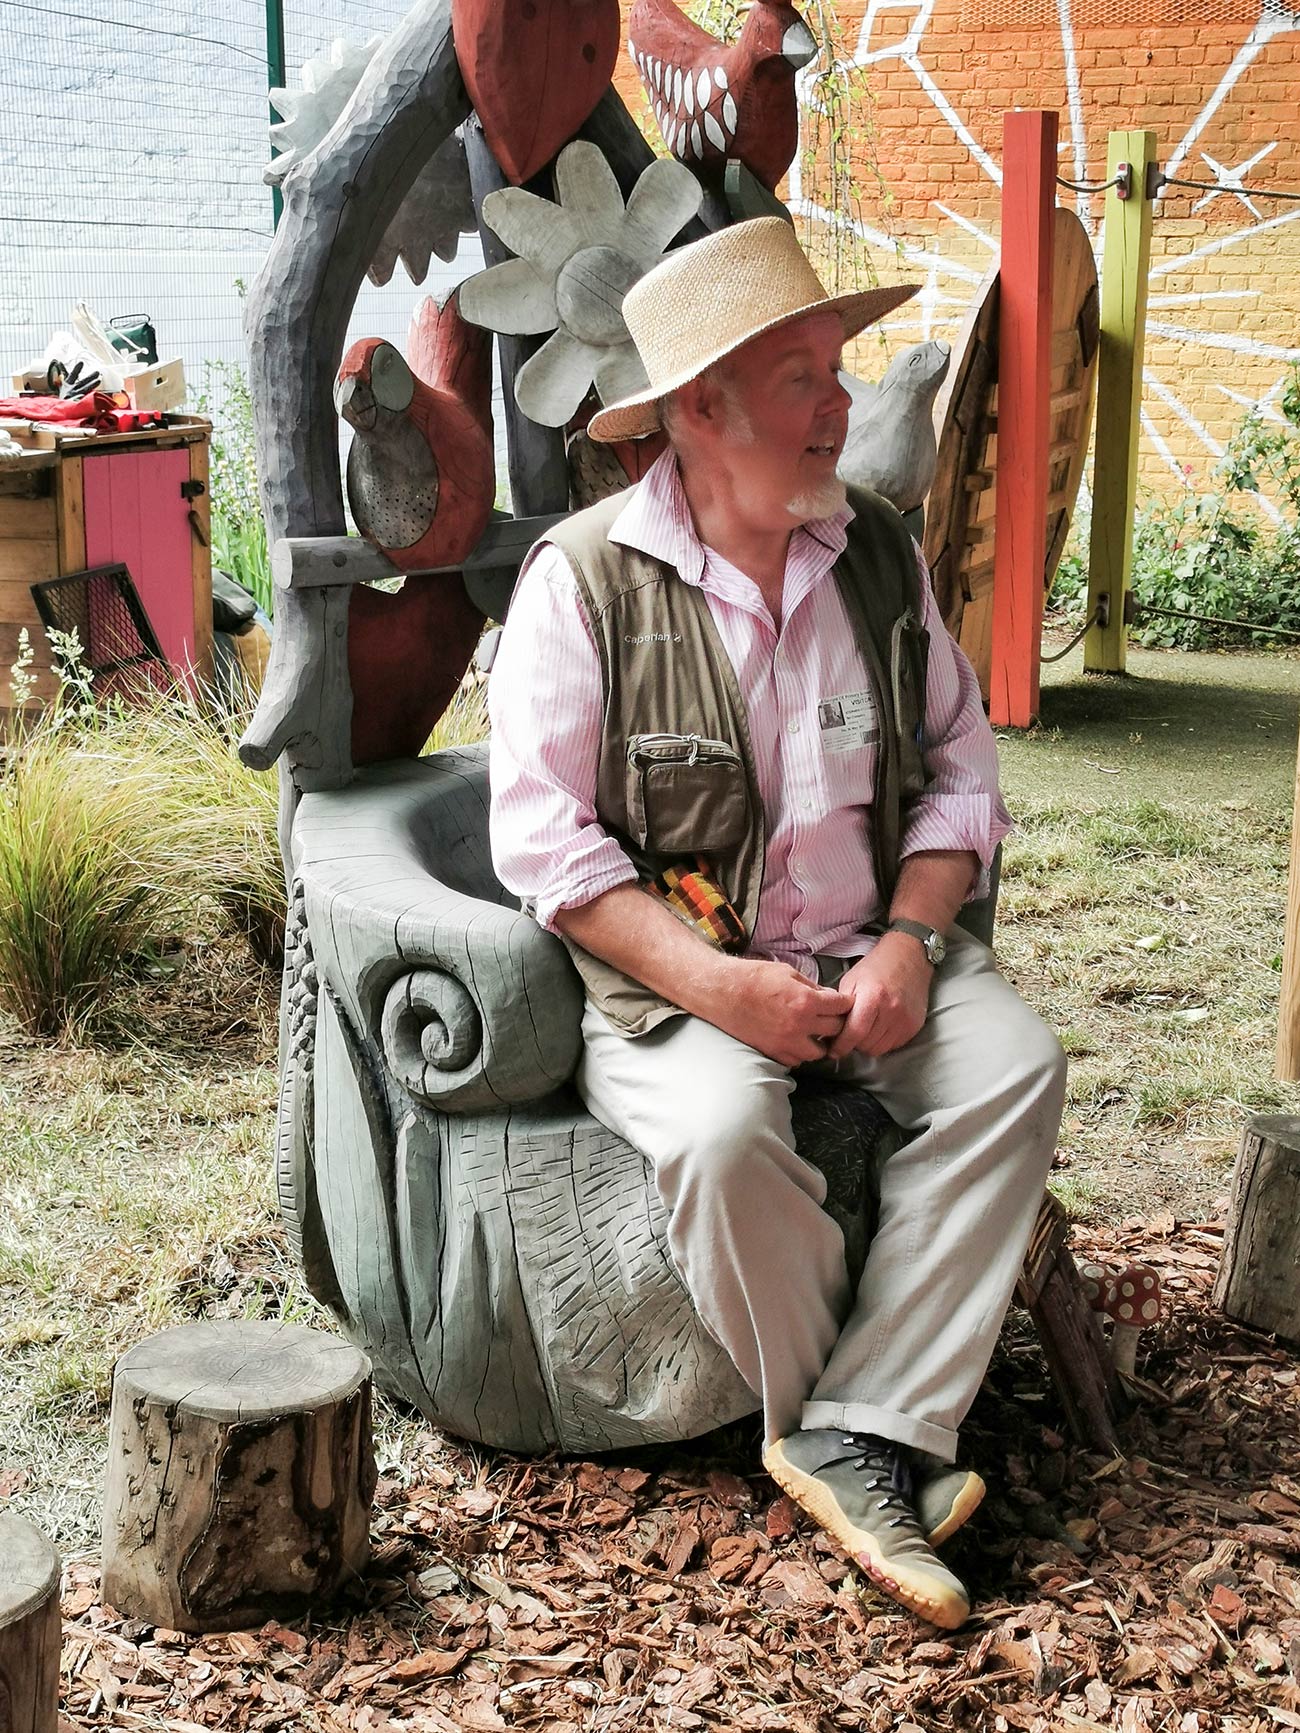 Sculptor and community placemaker Stephen Stockbridge, of Creative Nature HQ, on his Story-throne